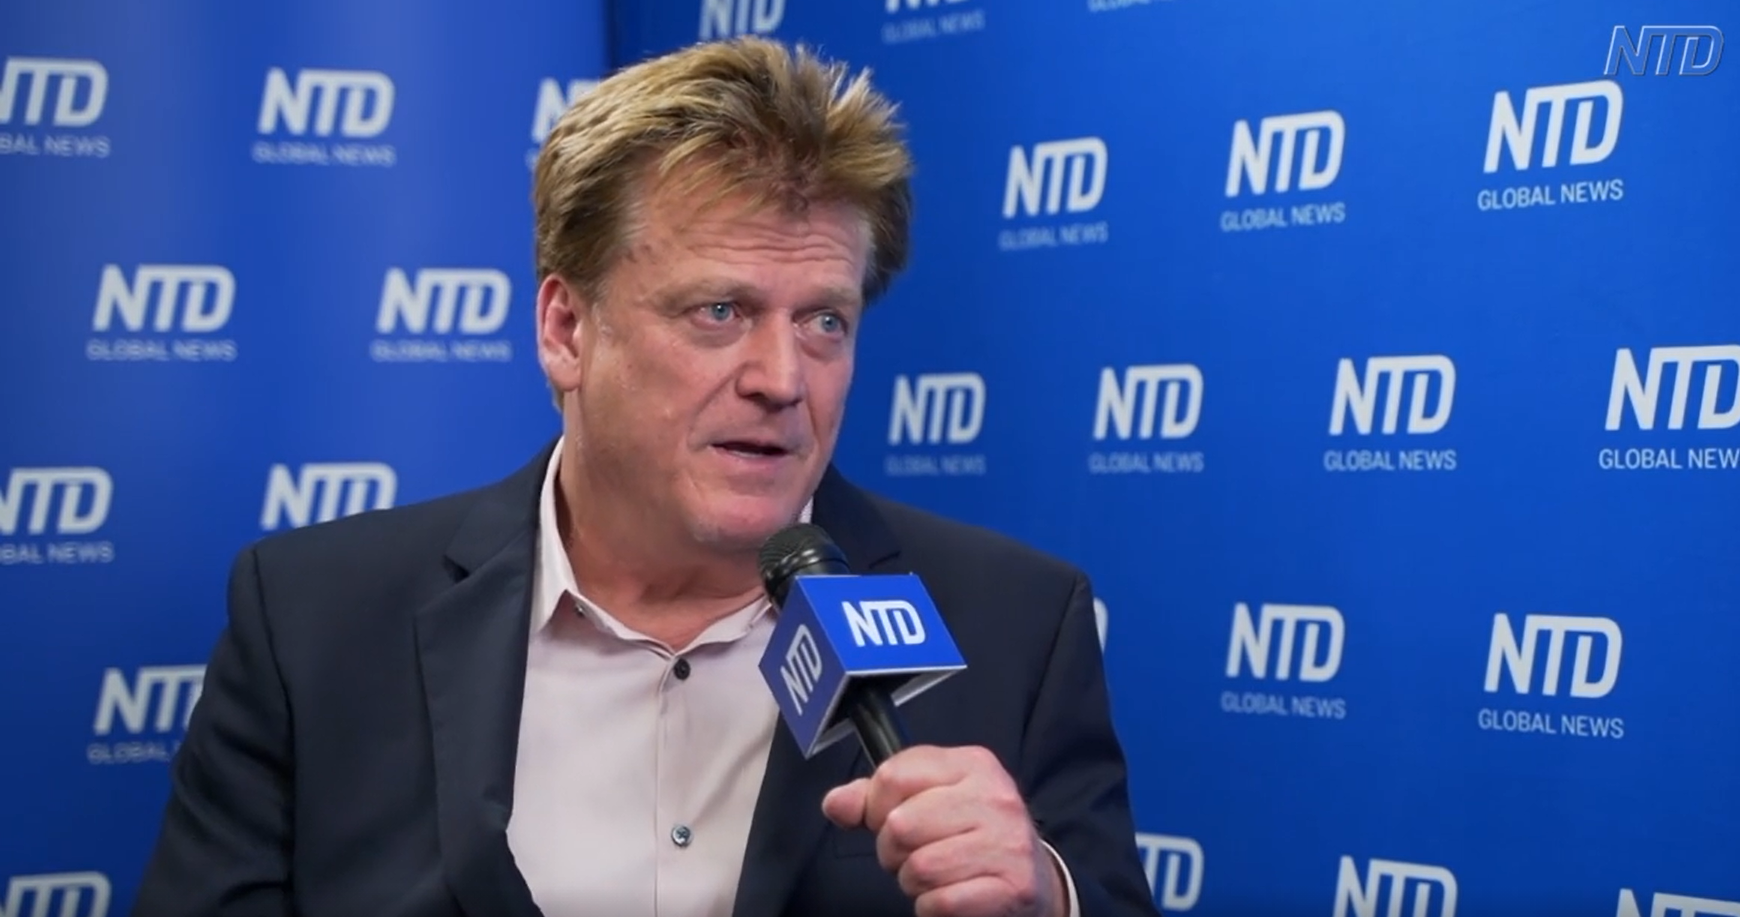 Patrick Byrne Launches New Project to Continue Fight for Election Integrity